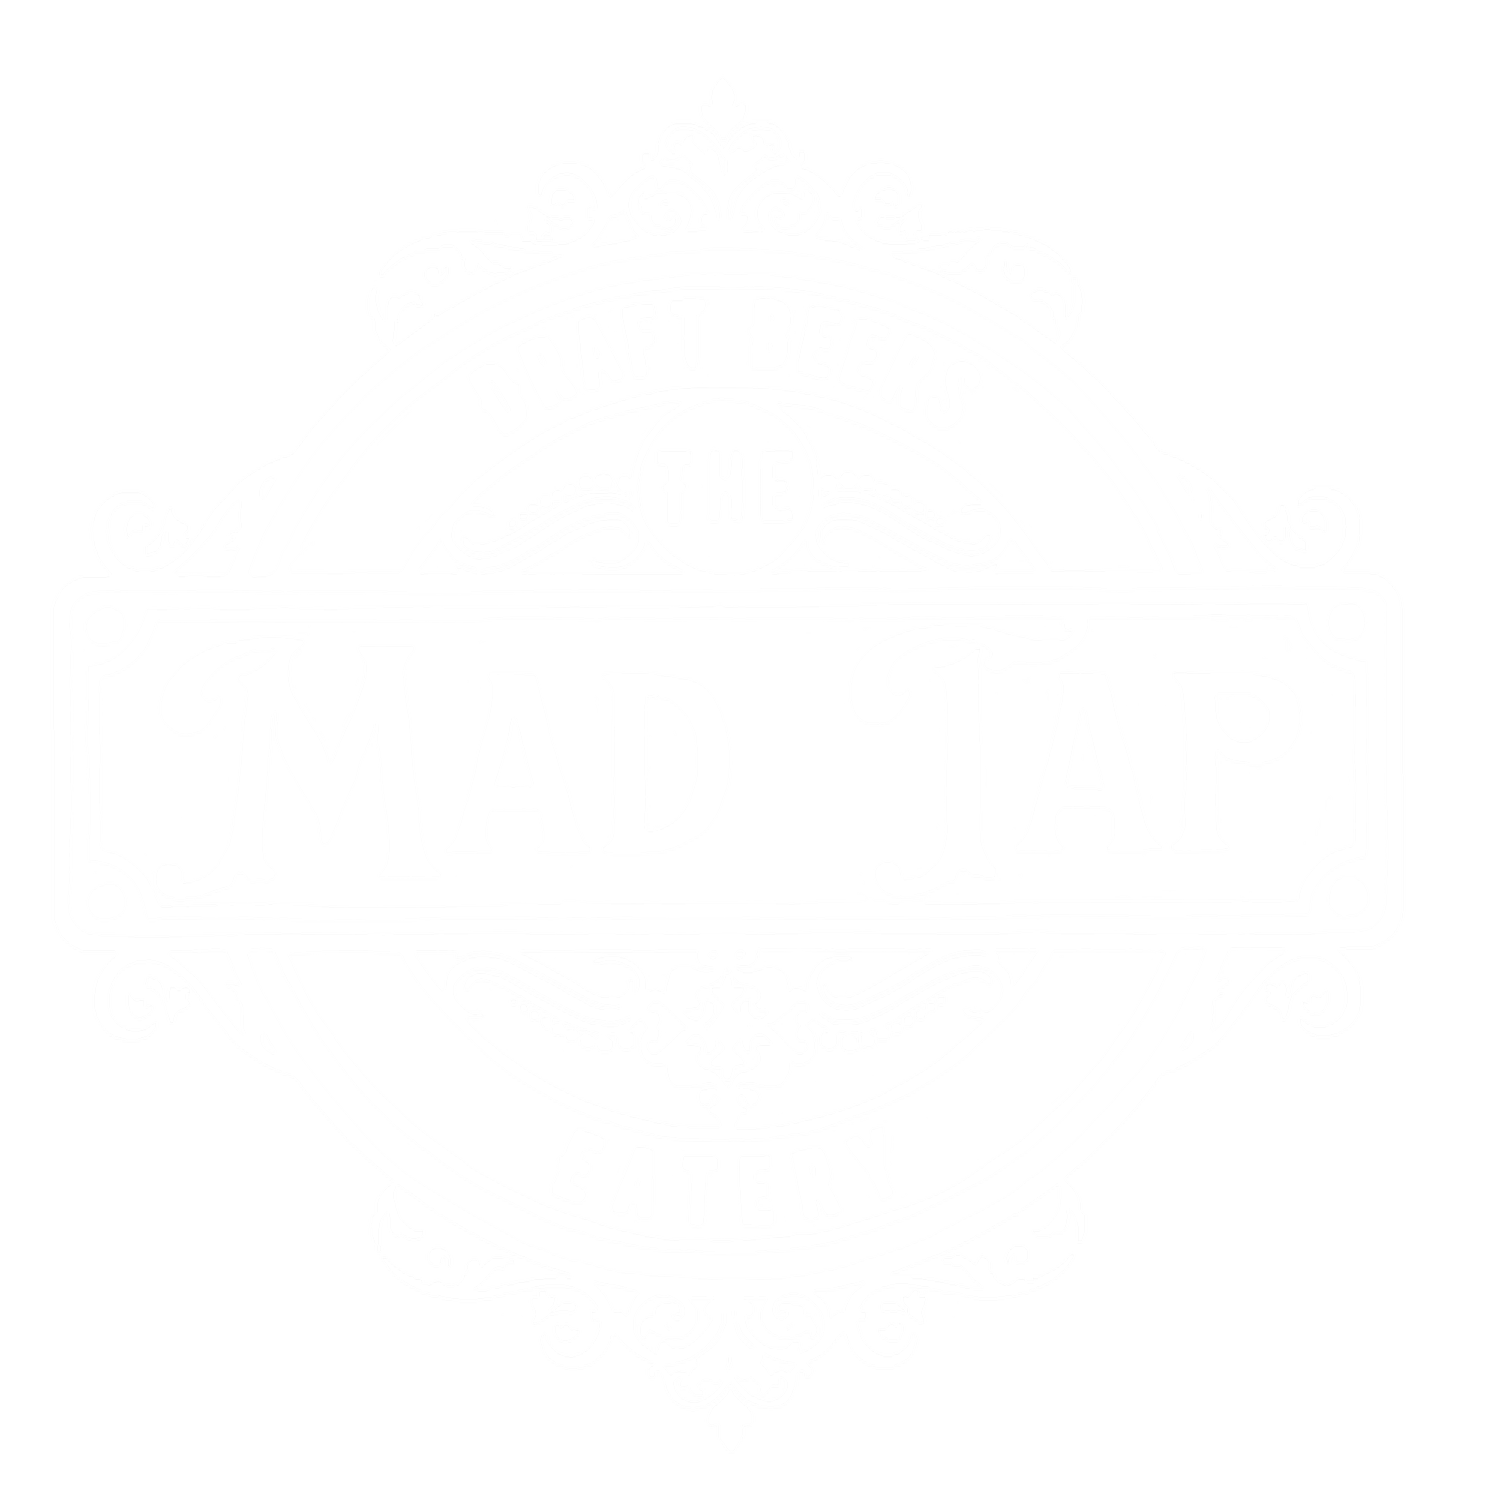 The Mad Tap